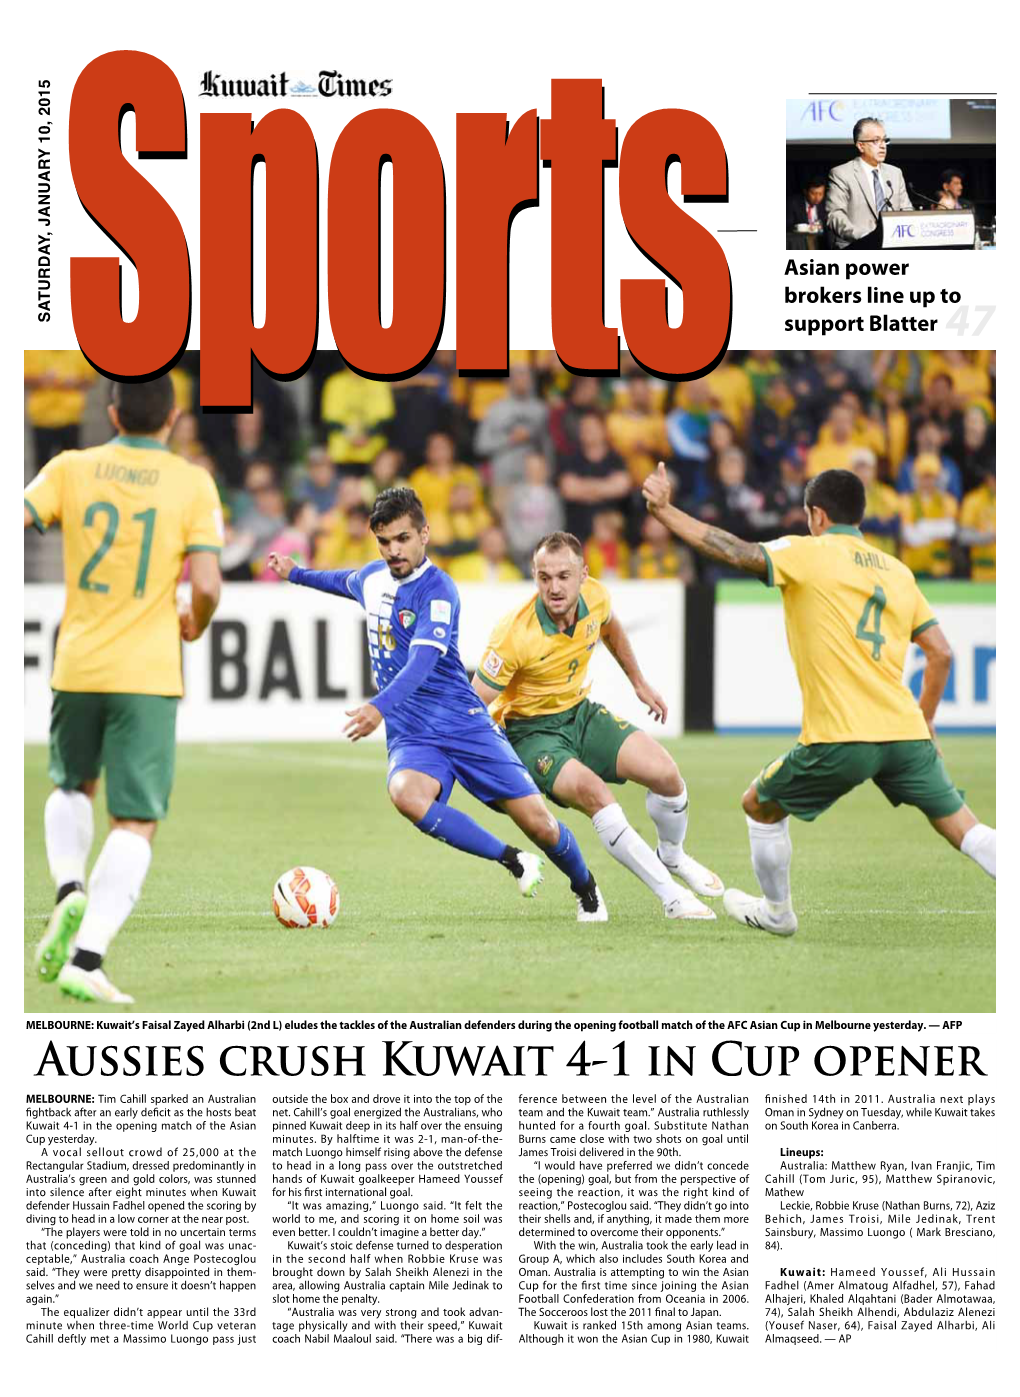 Aussies Crush Kuwait 4-1 in Cup Opener